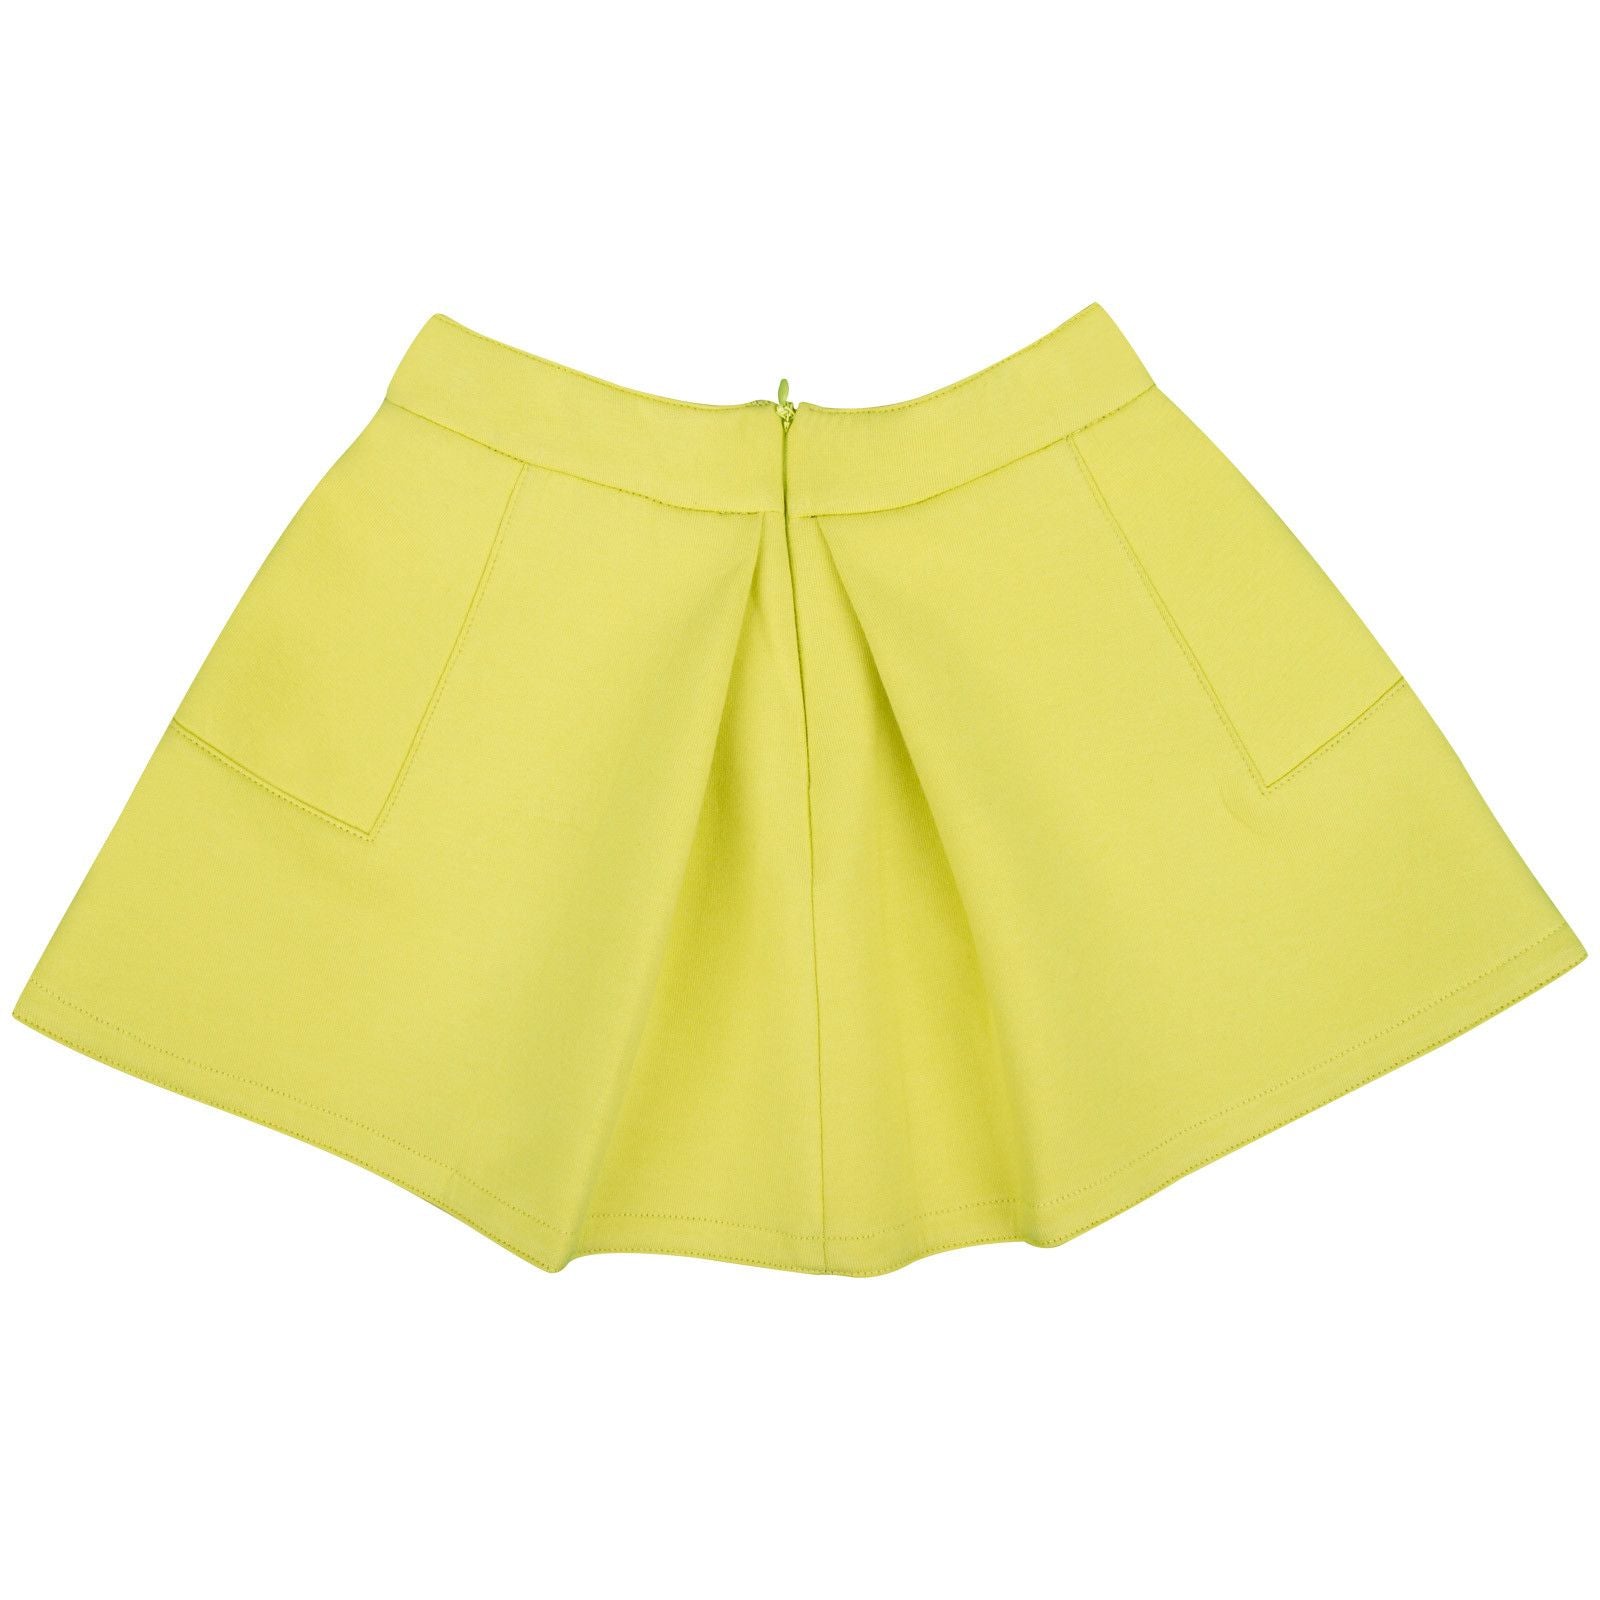 Girls Lime Green Embroidered Logo Skirt With Pockets - CÉMAROSE | Children's Fashion Store - 2